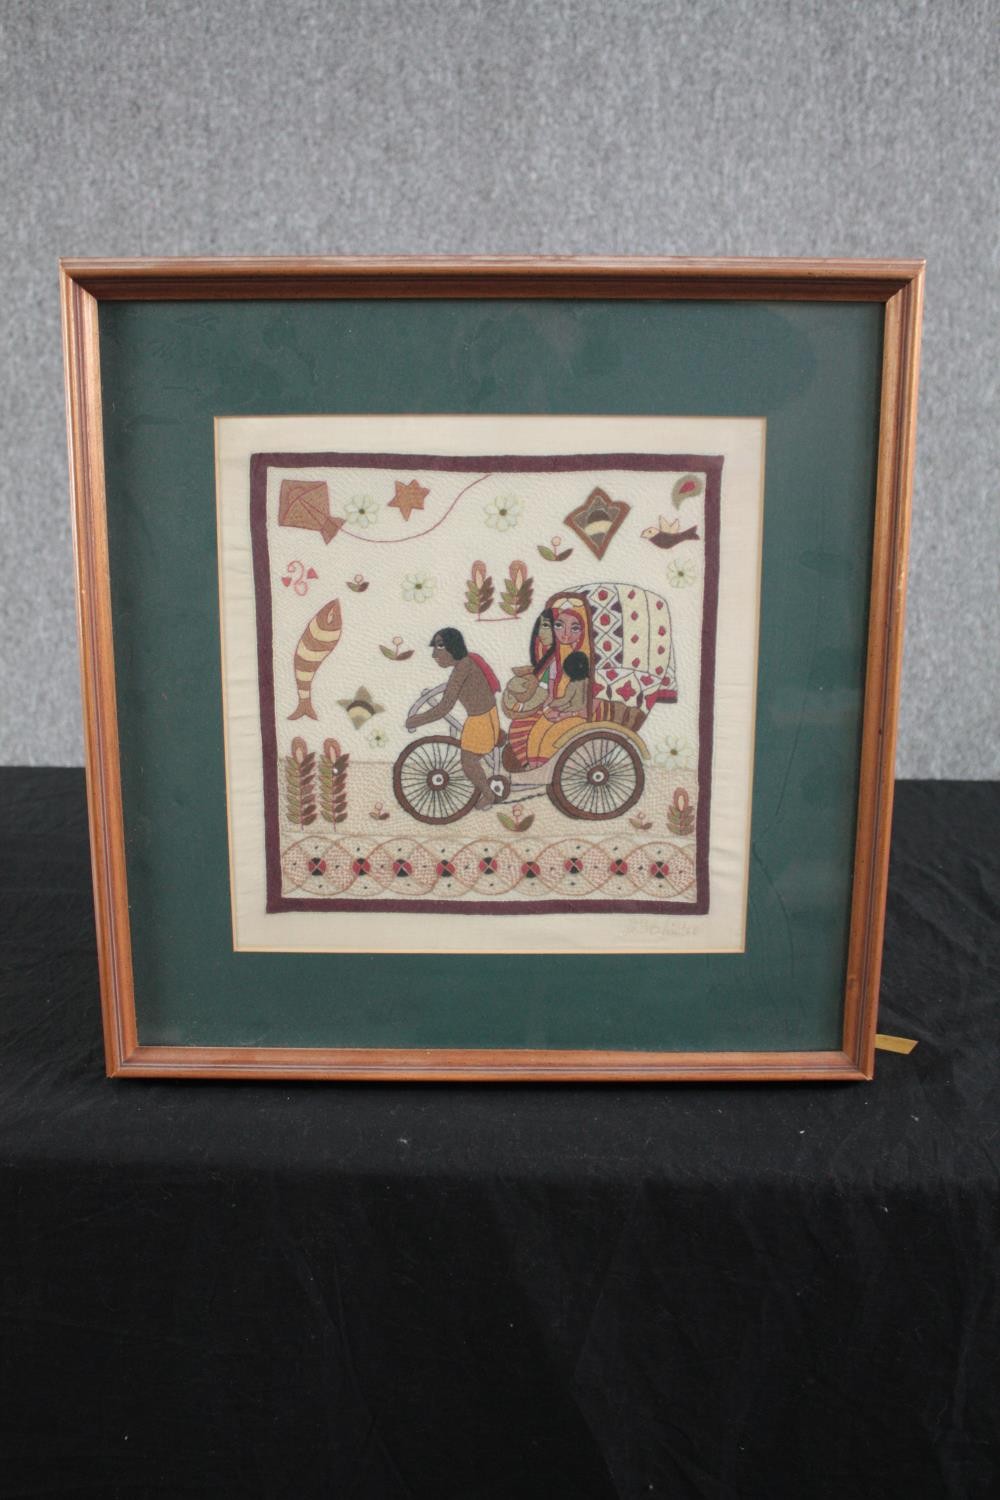 Embroidery print. Probably Indian. Rickshaw puller. Edition of 250 copies. Unsigned. Framed and